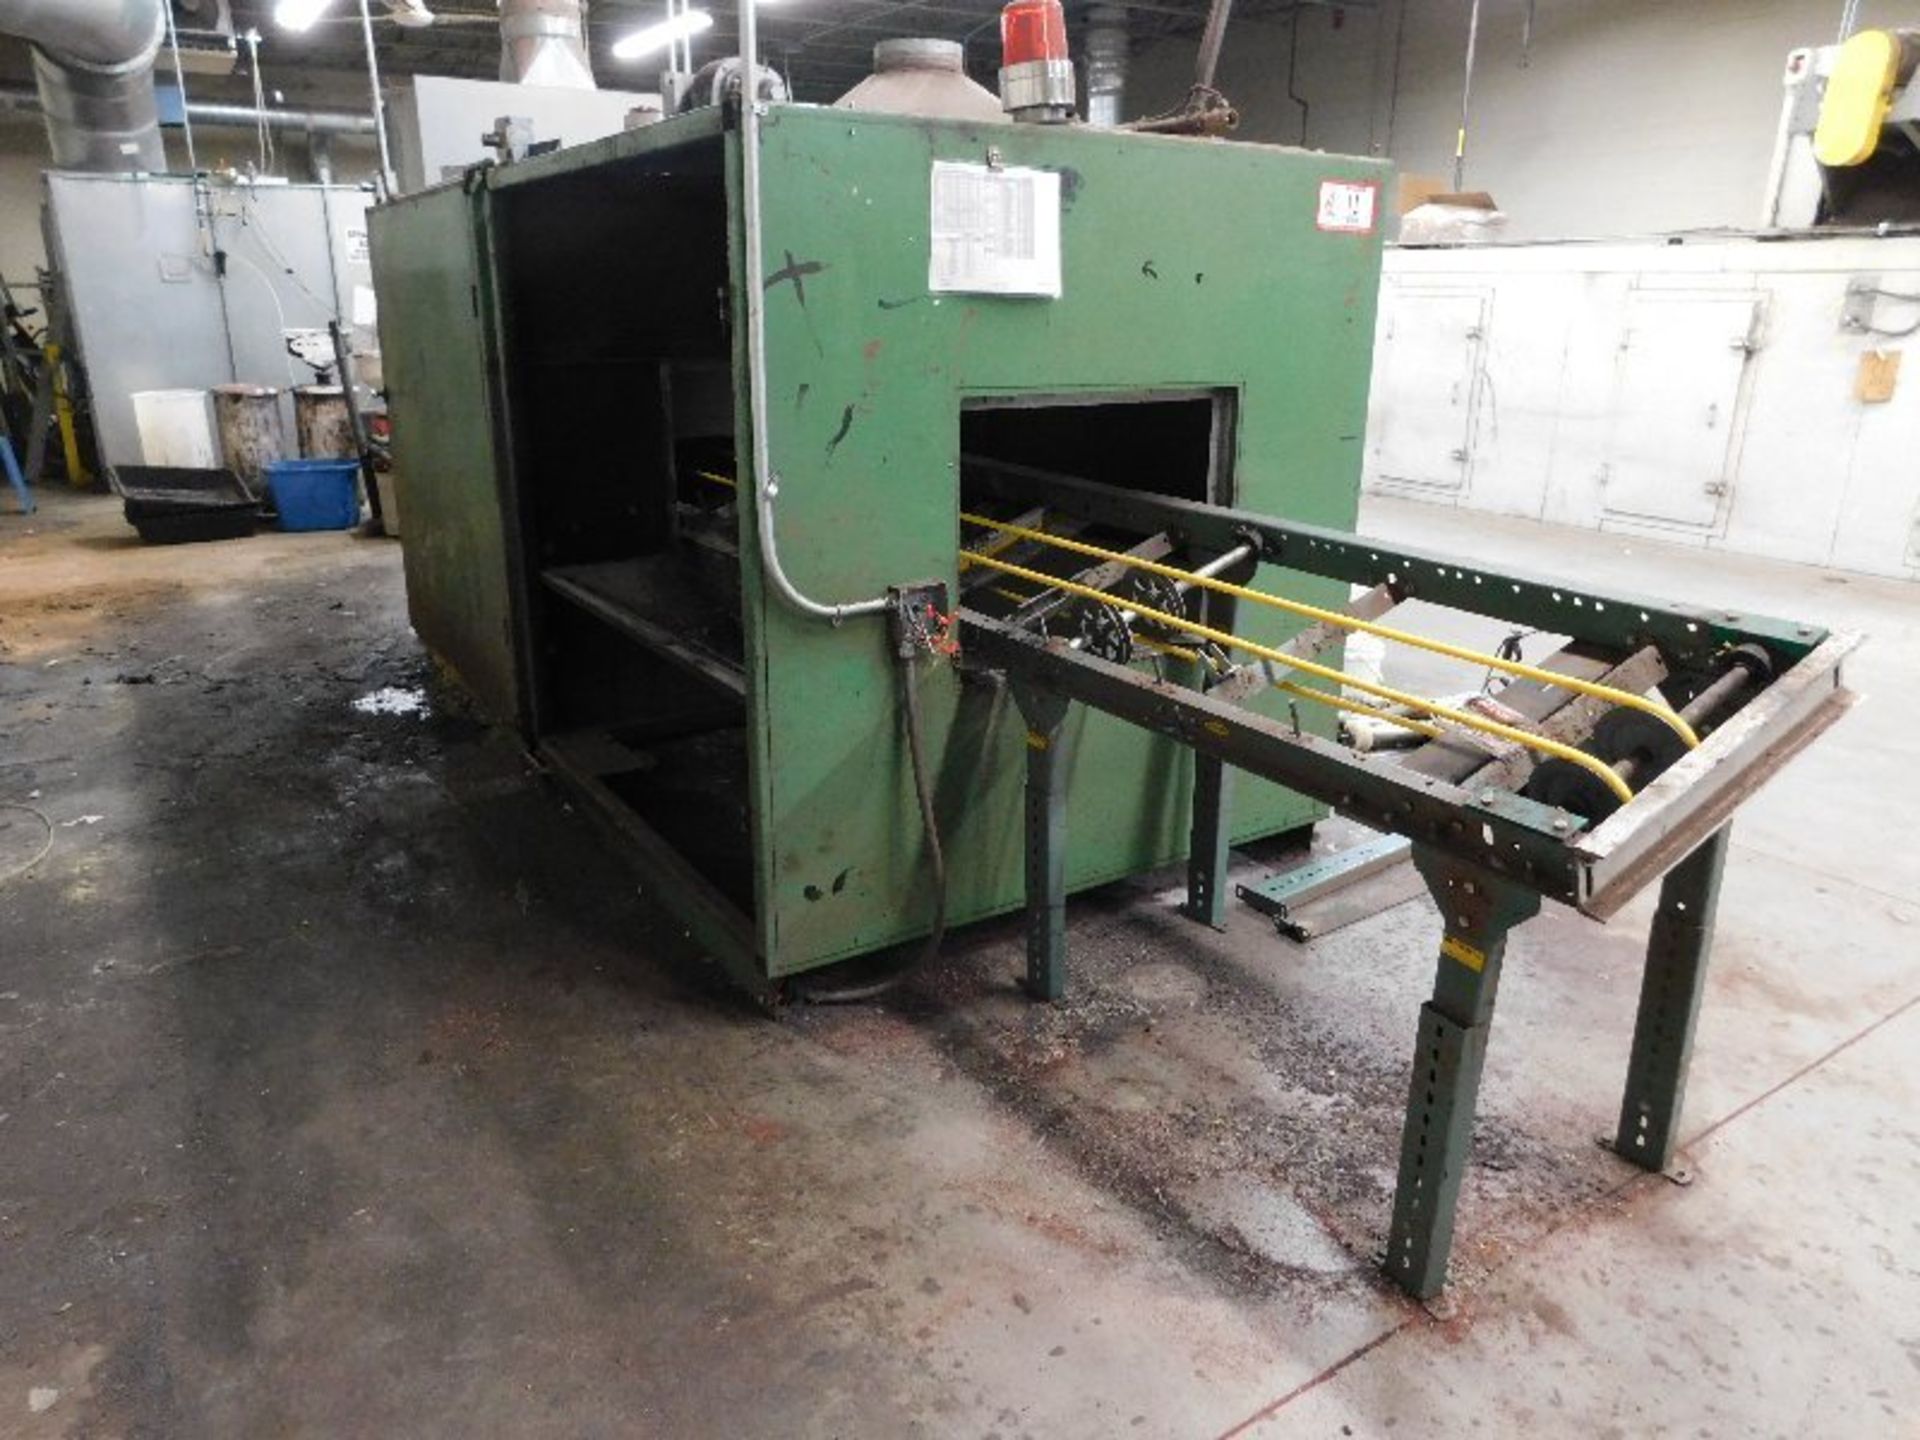 Stone Coating and Spray Line, W/Conveyor, Electronic Control Panel, Line Automatic, Approx. 40' - Image 4 of 6